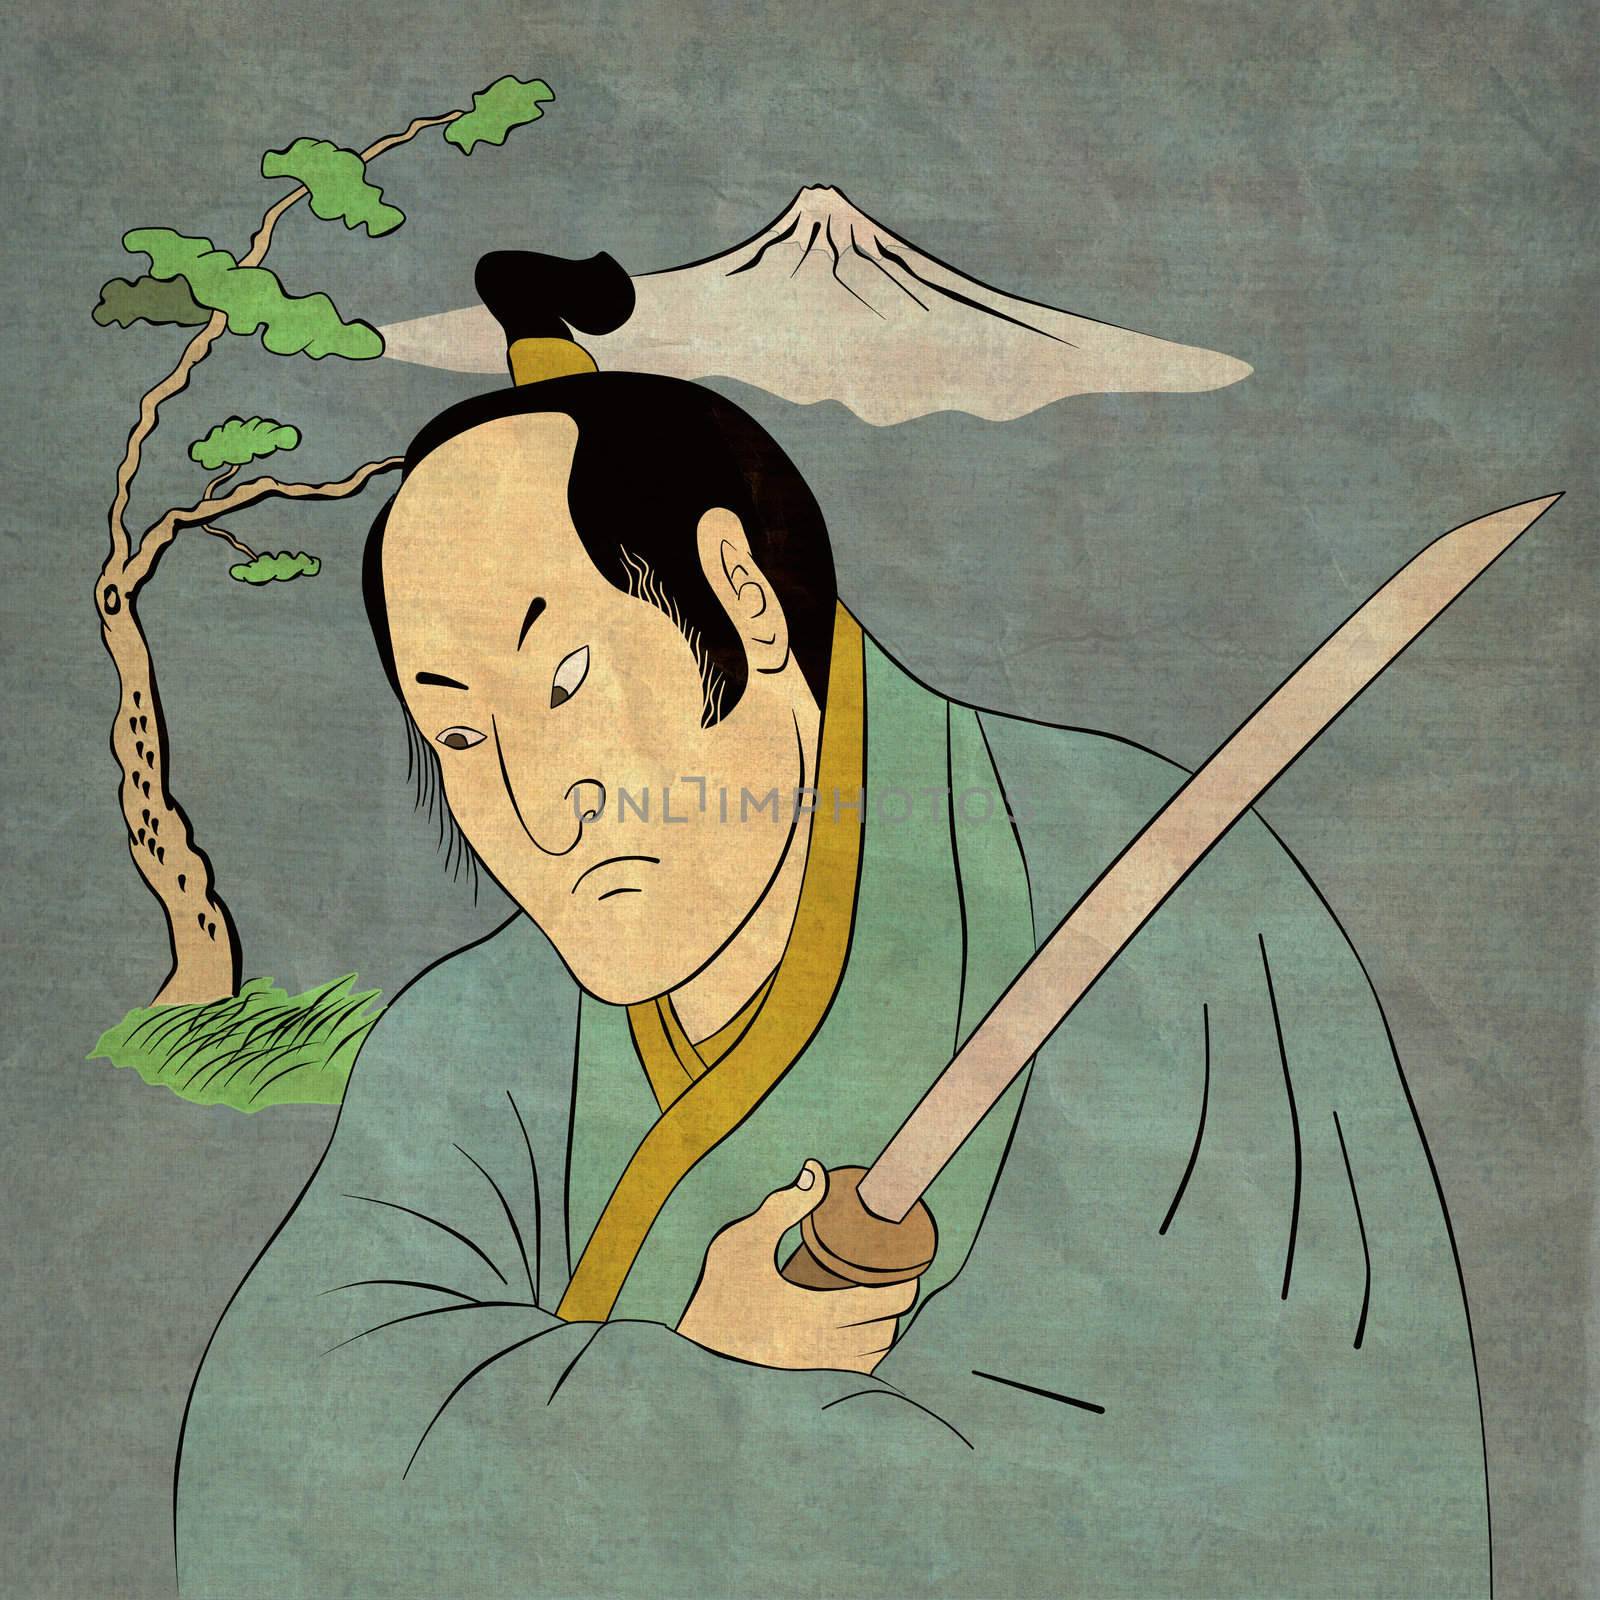  illustration of a Samurai warrior with katana sword in fighting stance with tree and mountain in background done in cartoon style Japanese wood block print.